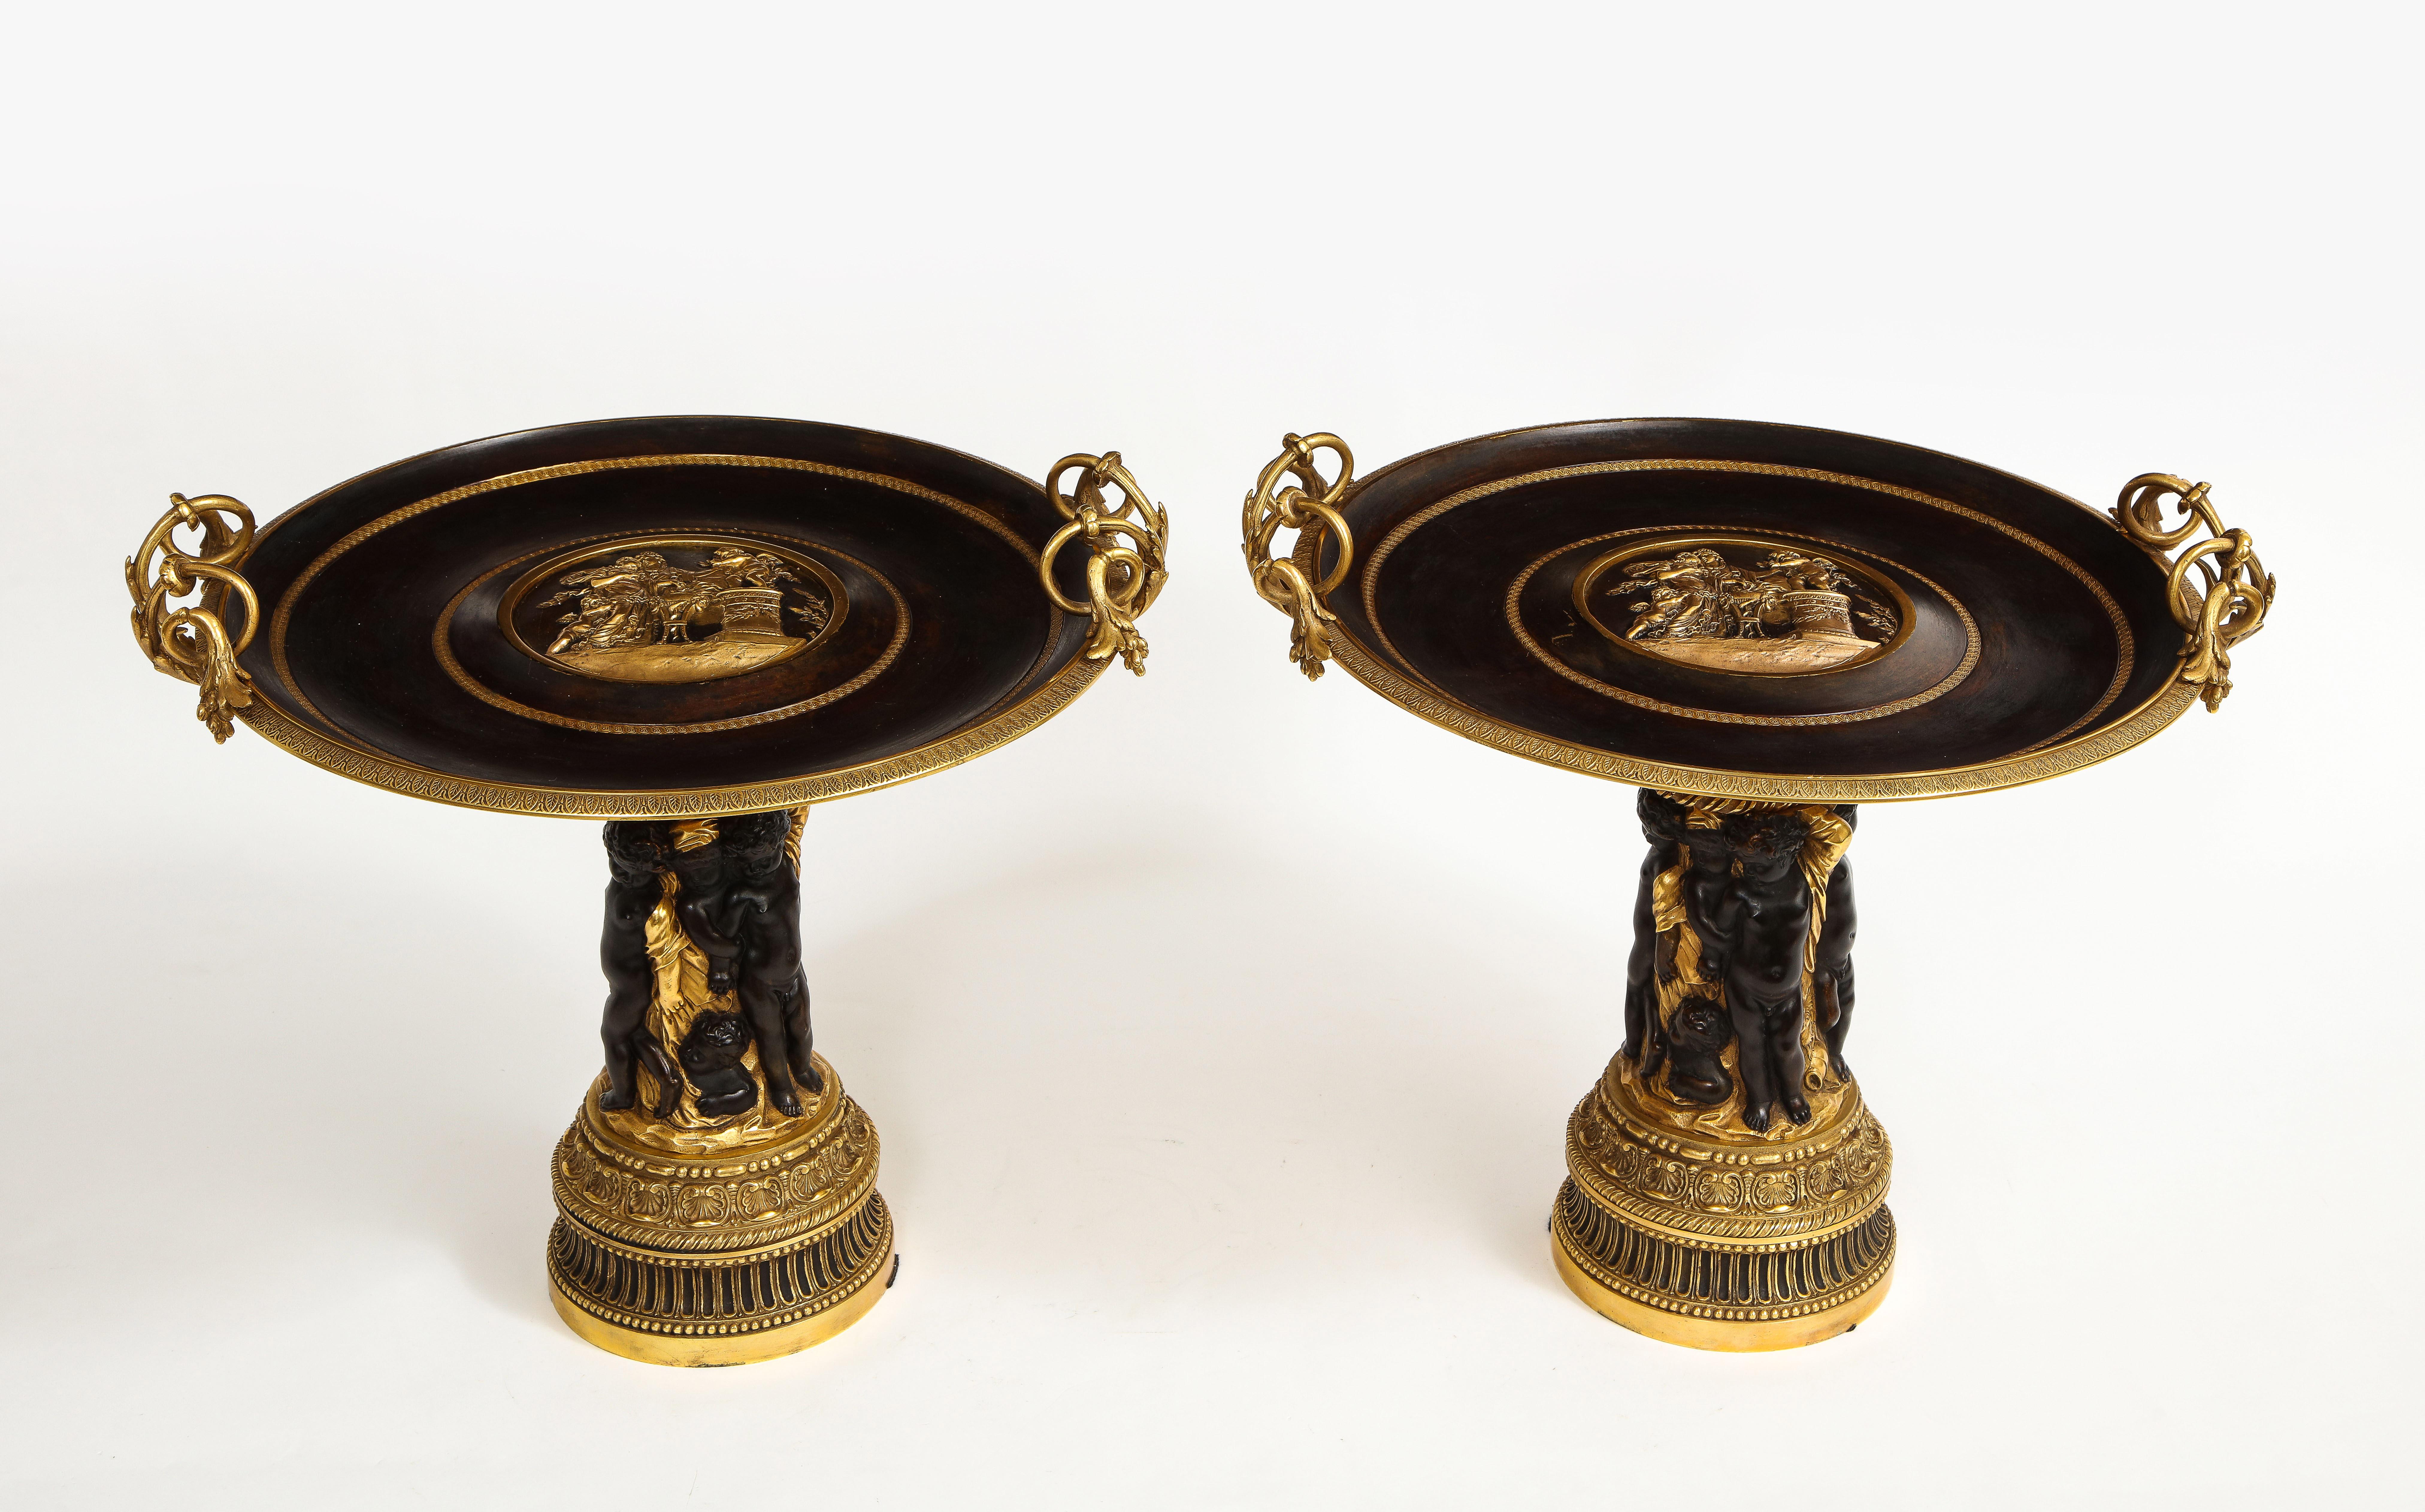 A fantastic pair of French 19th century Napoleon III period patinated and dore bronze tazzas/centerpieces. Each circular tazza top is beautifully patinated and further decorated with dore bronze rings. The center of each tazza top is complete with a